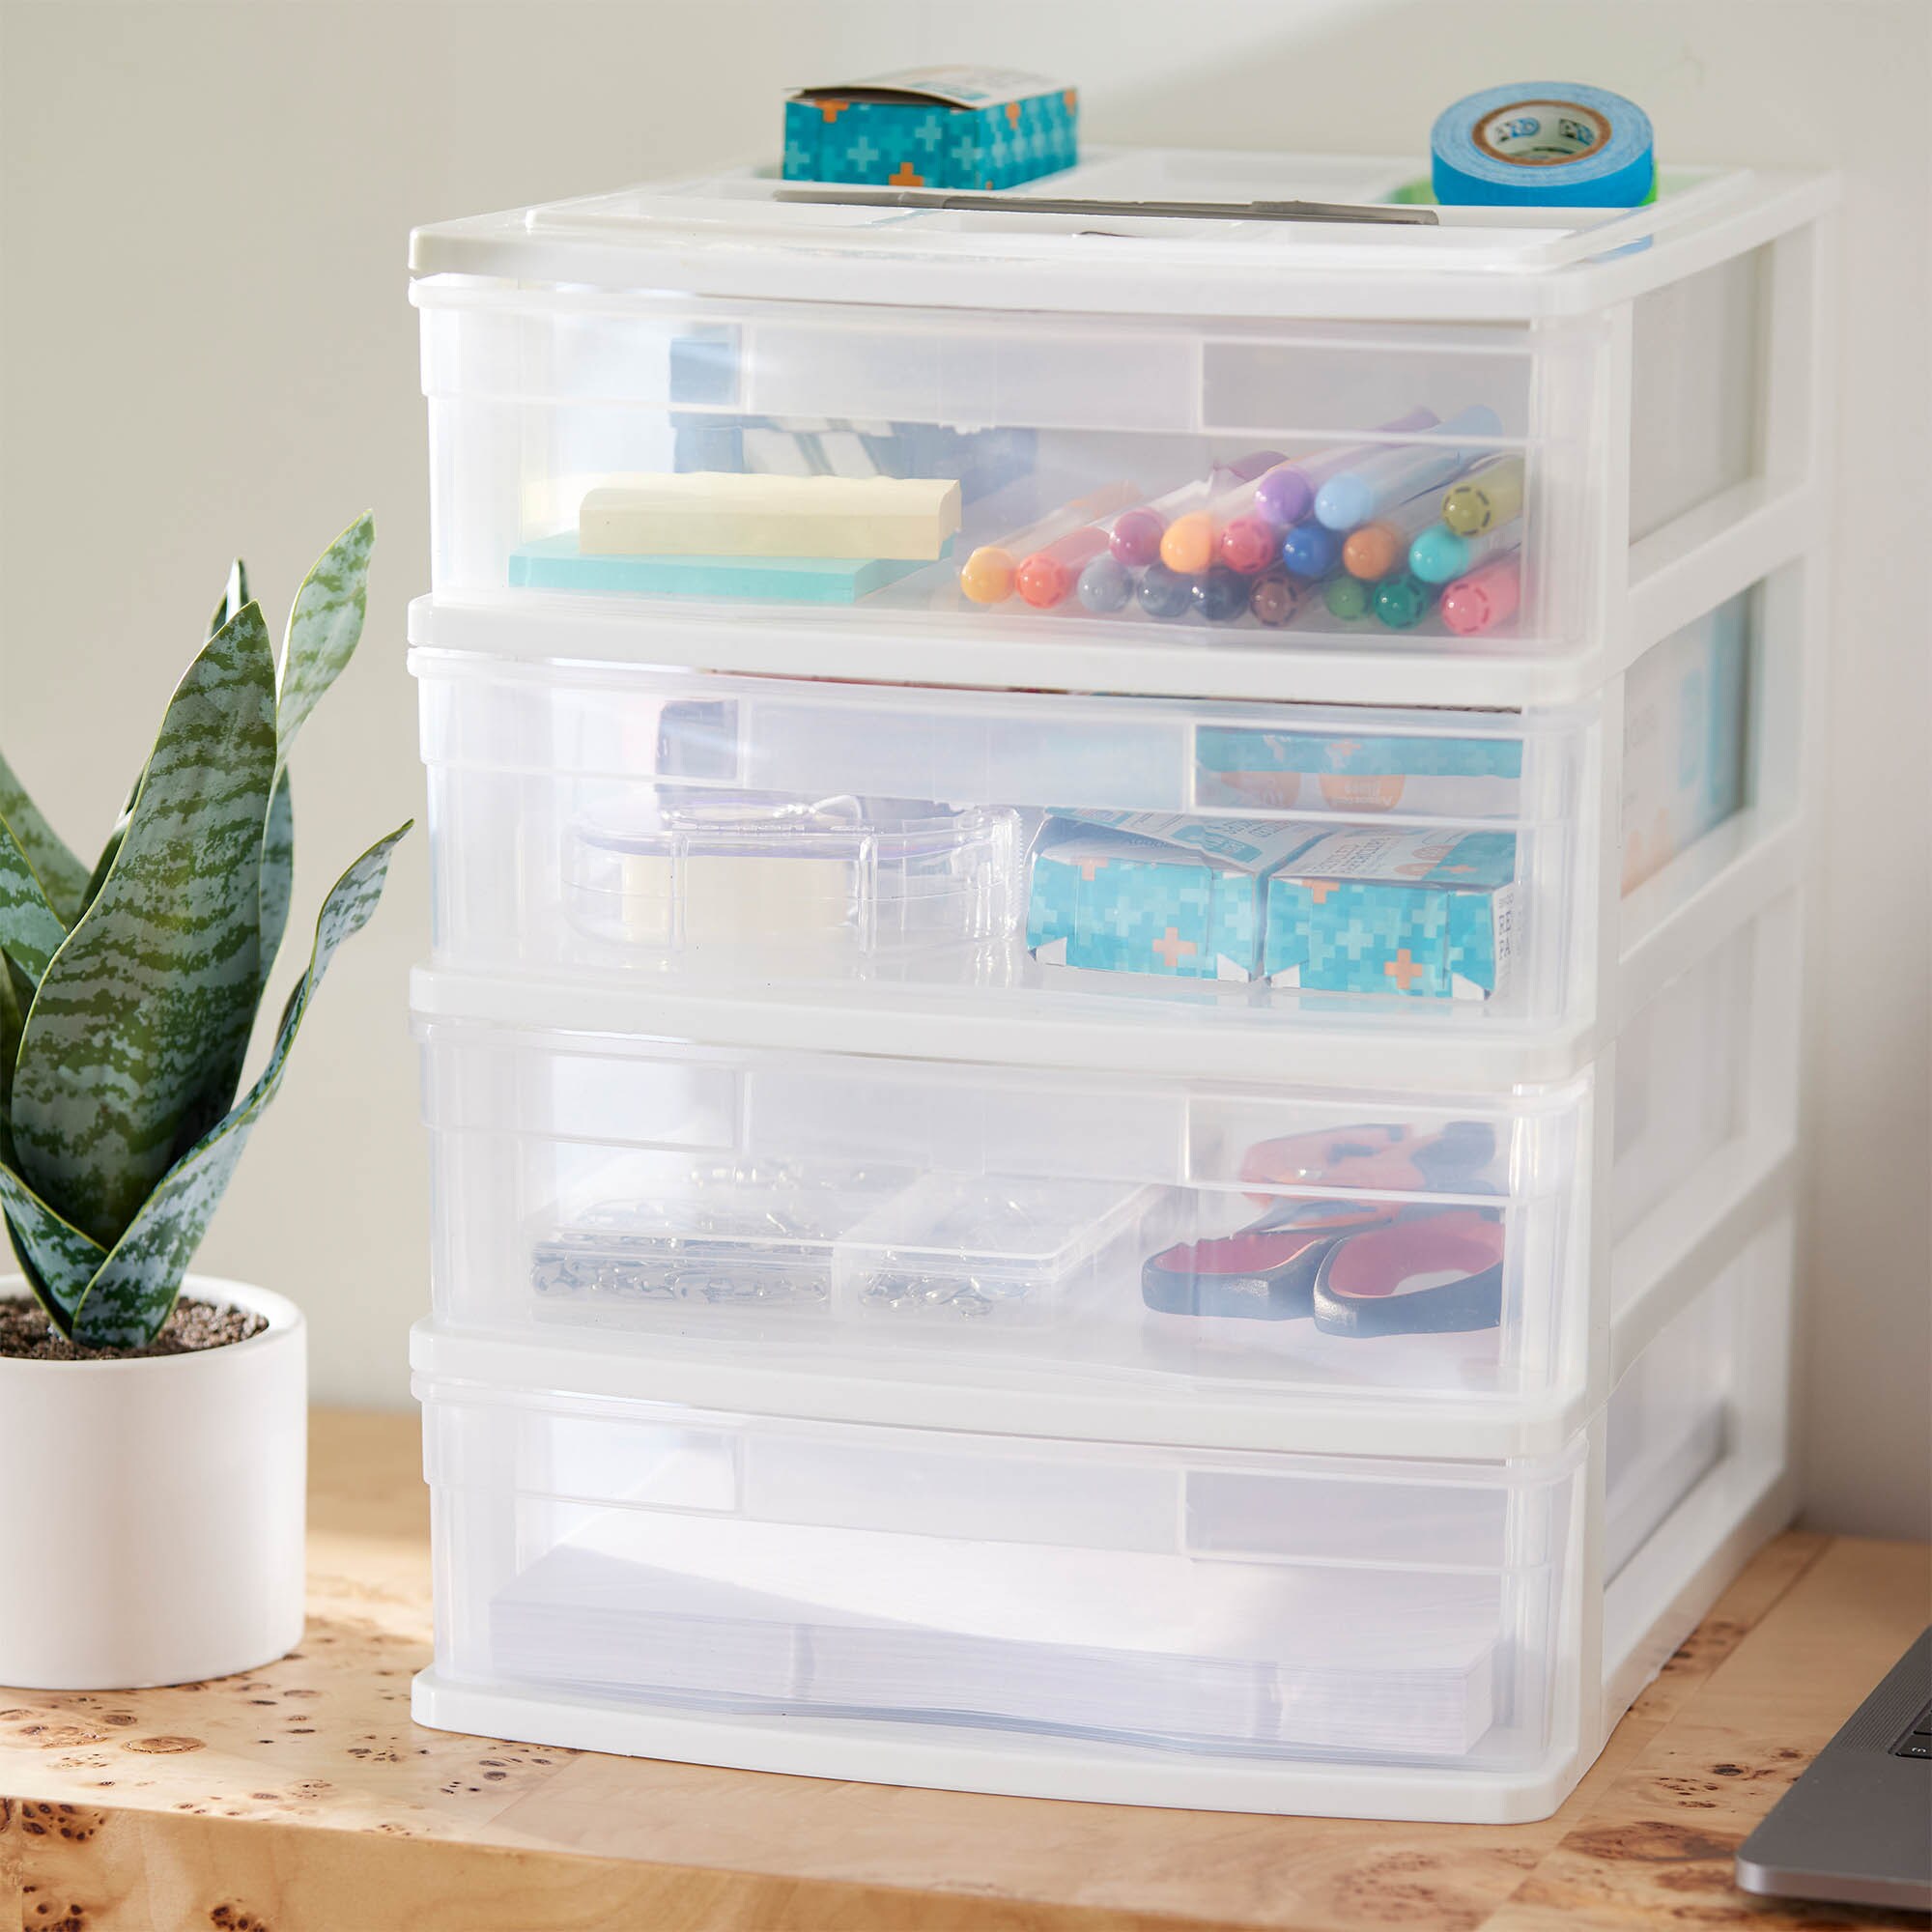 Gracious Living Clear Mini 2 Drawer Desk and Office Organizer with